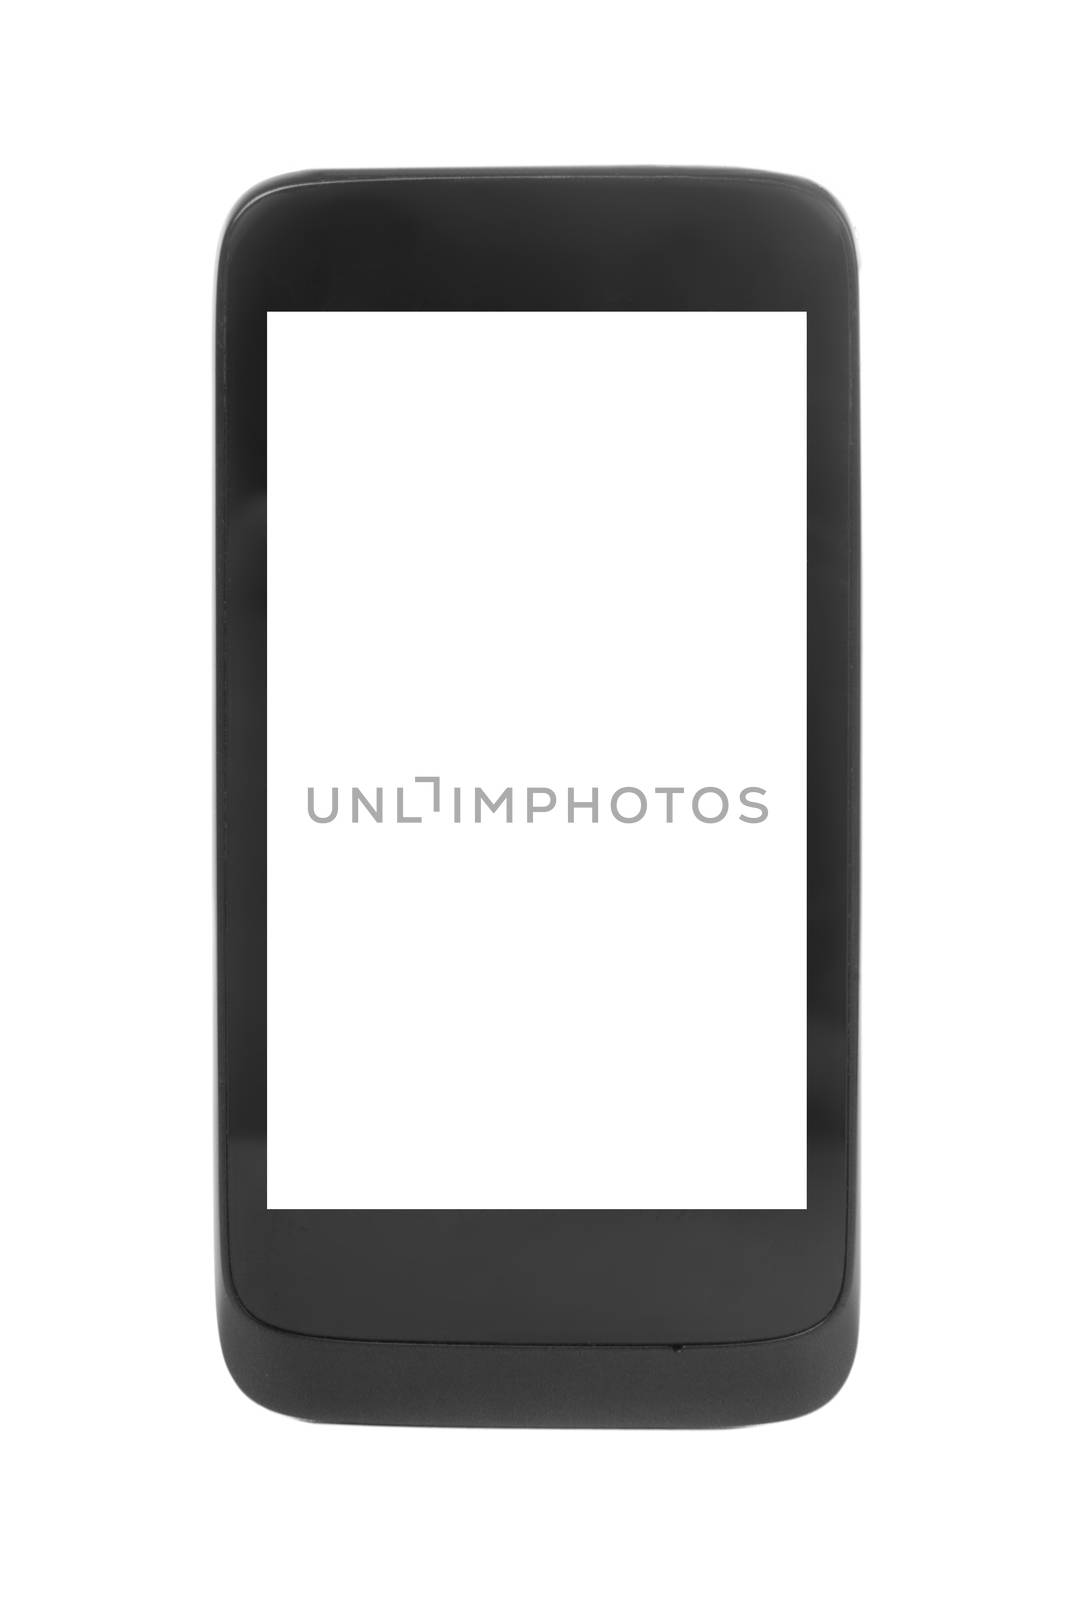 Modern black smartphone, isolated on white. by TpaBMa